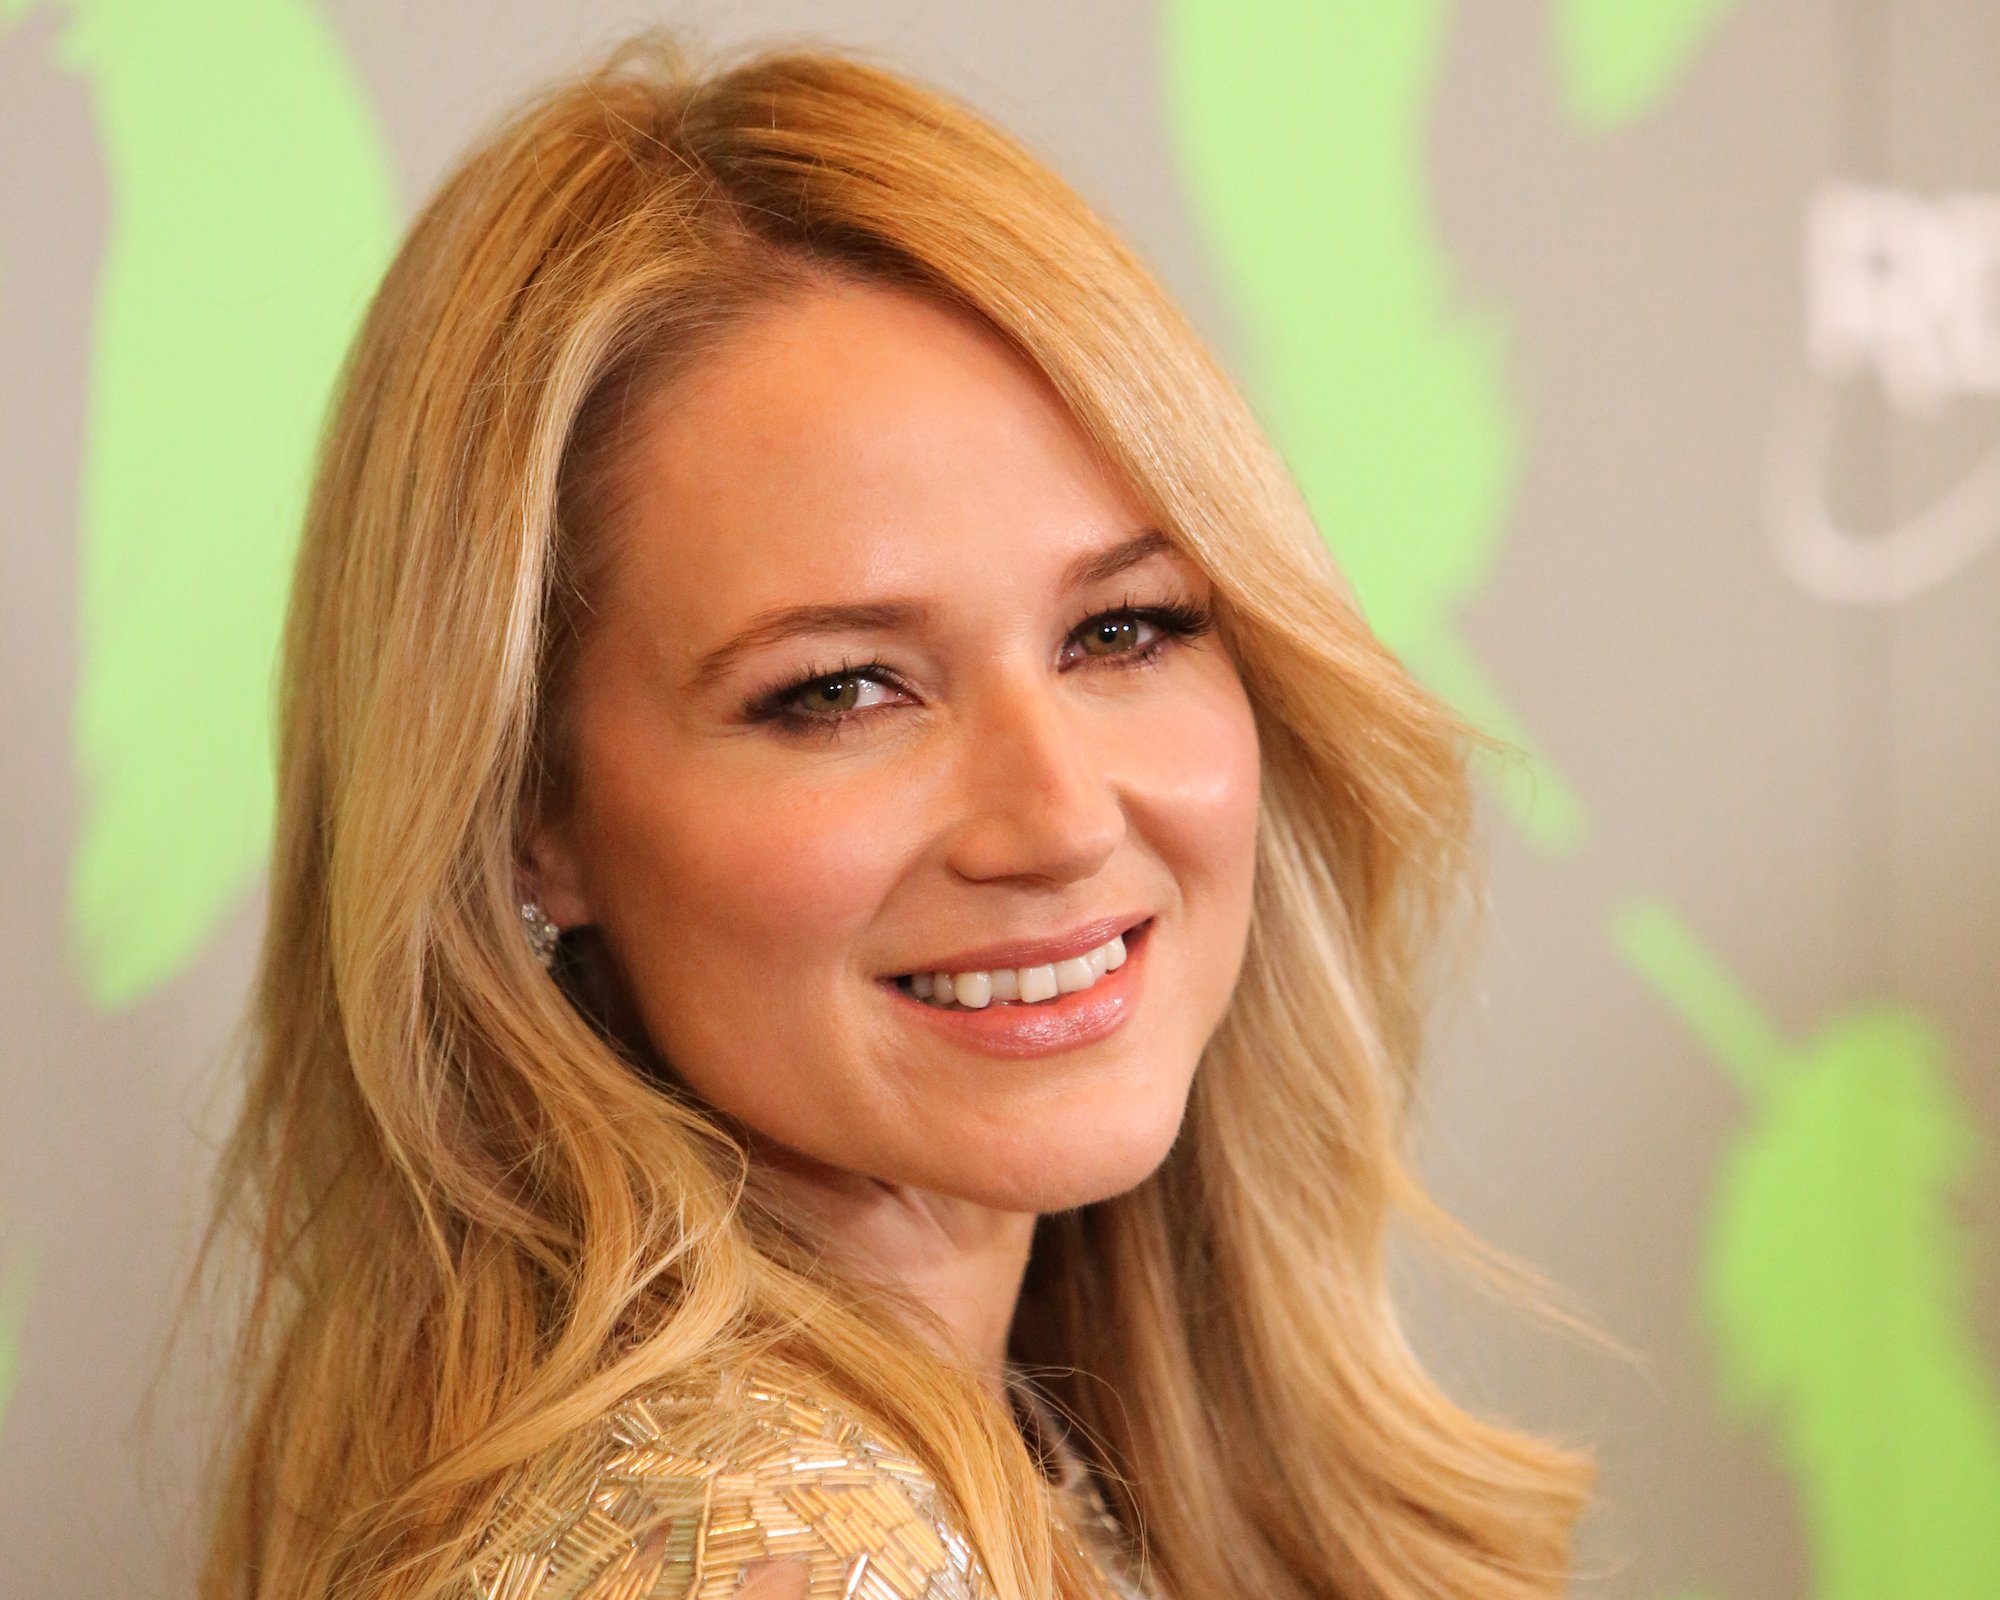 Jewel Explained Why She Won't 'Fix' Her Signature Snaggle-Tooth Smile